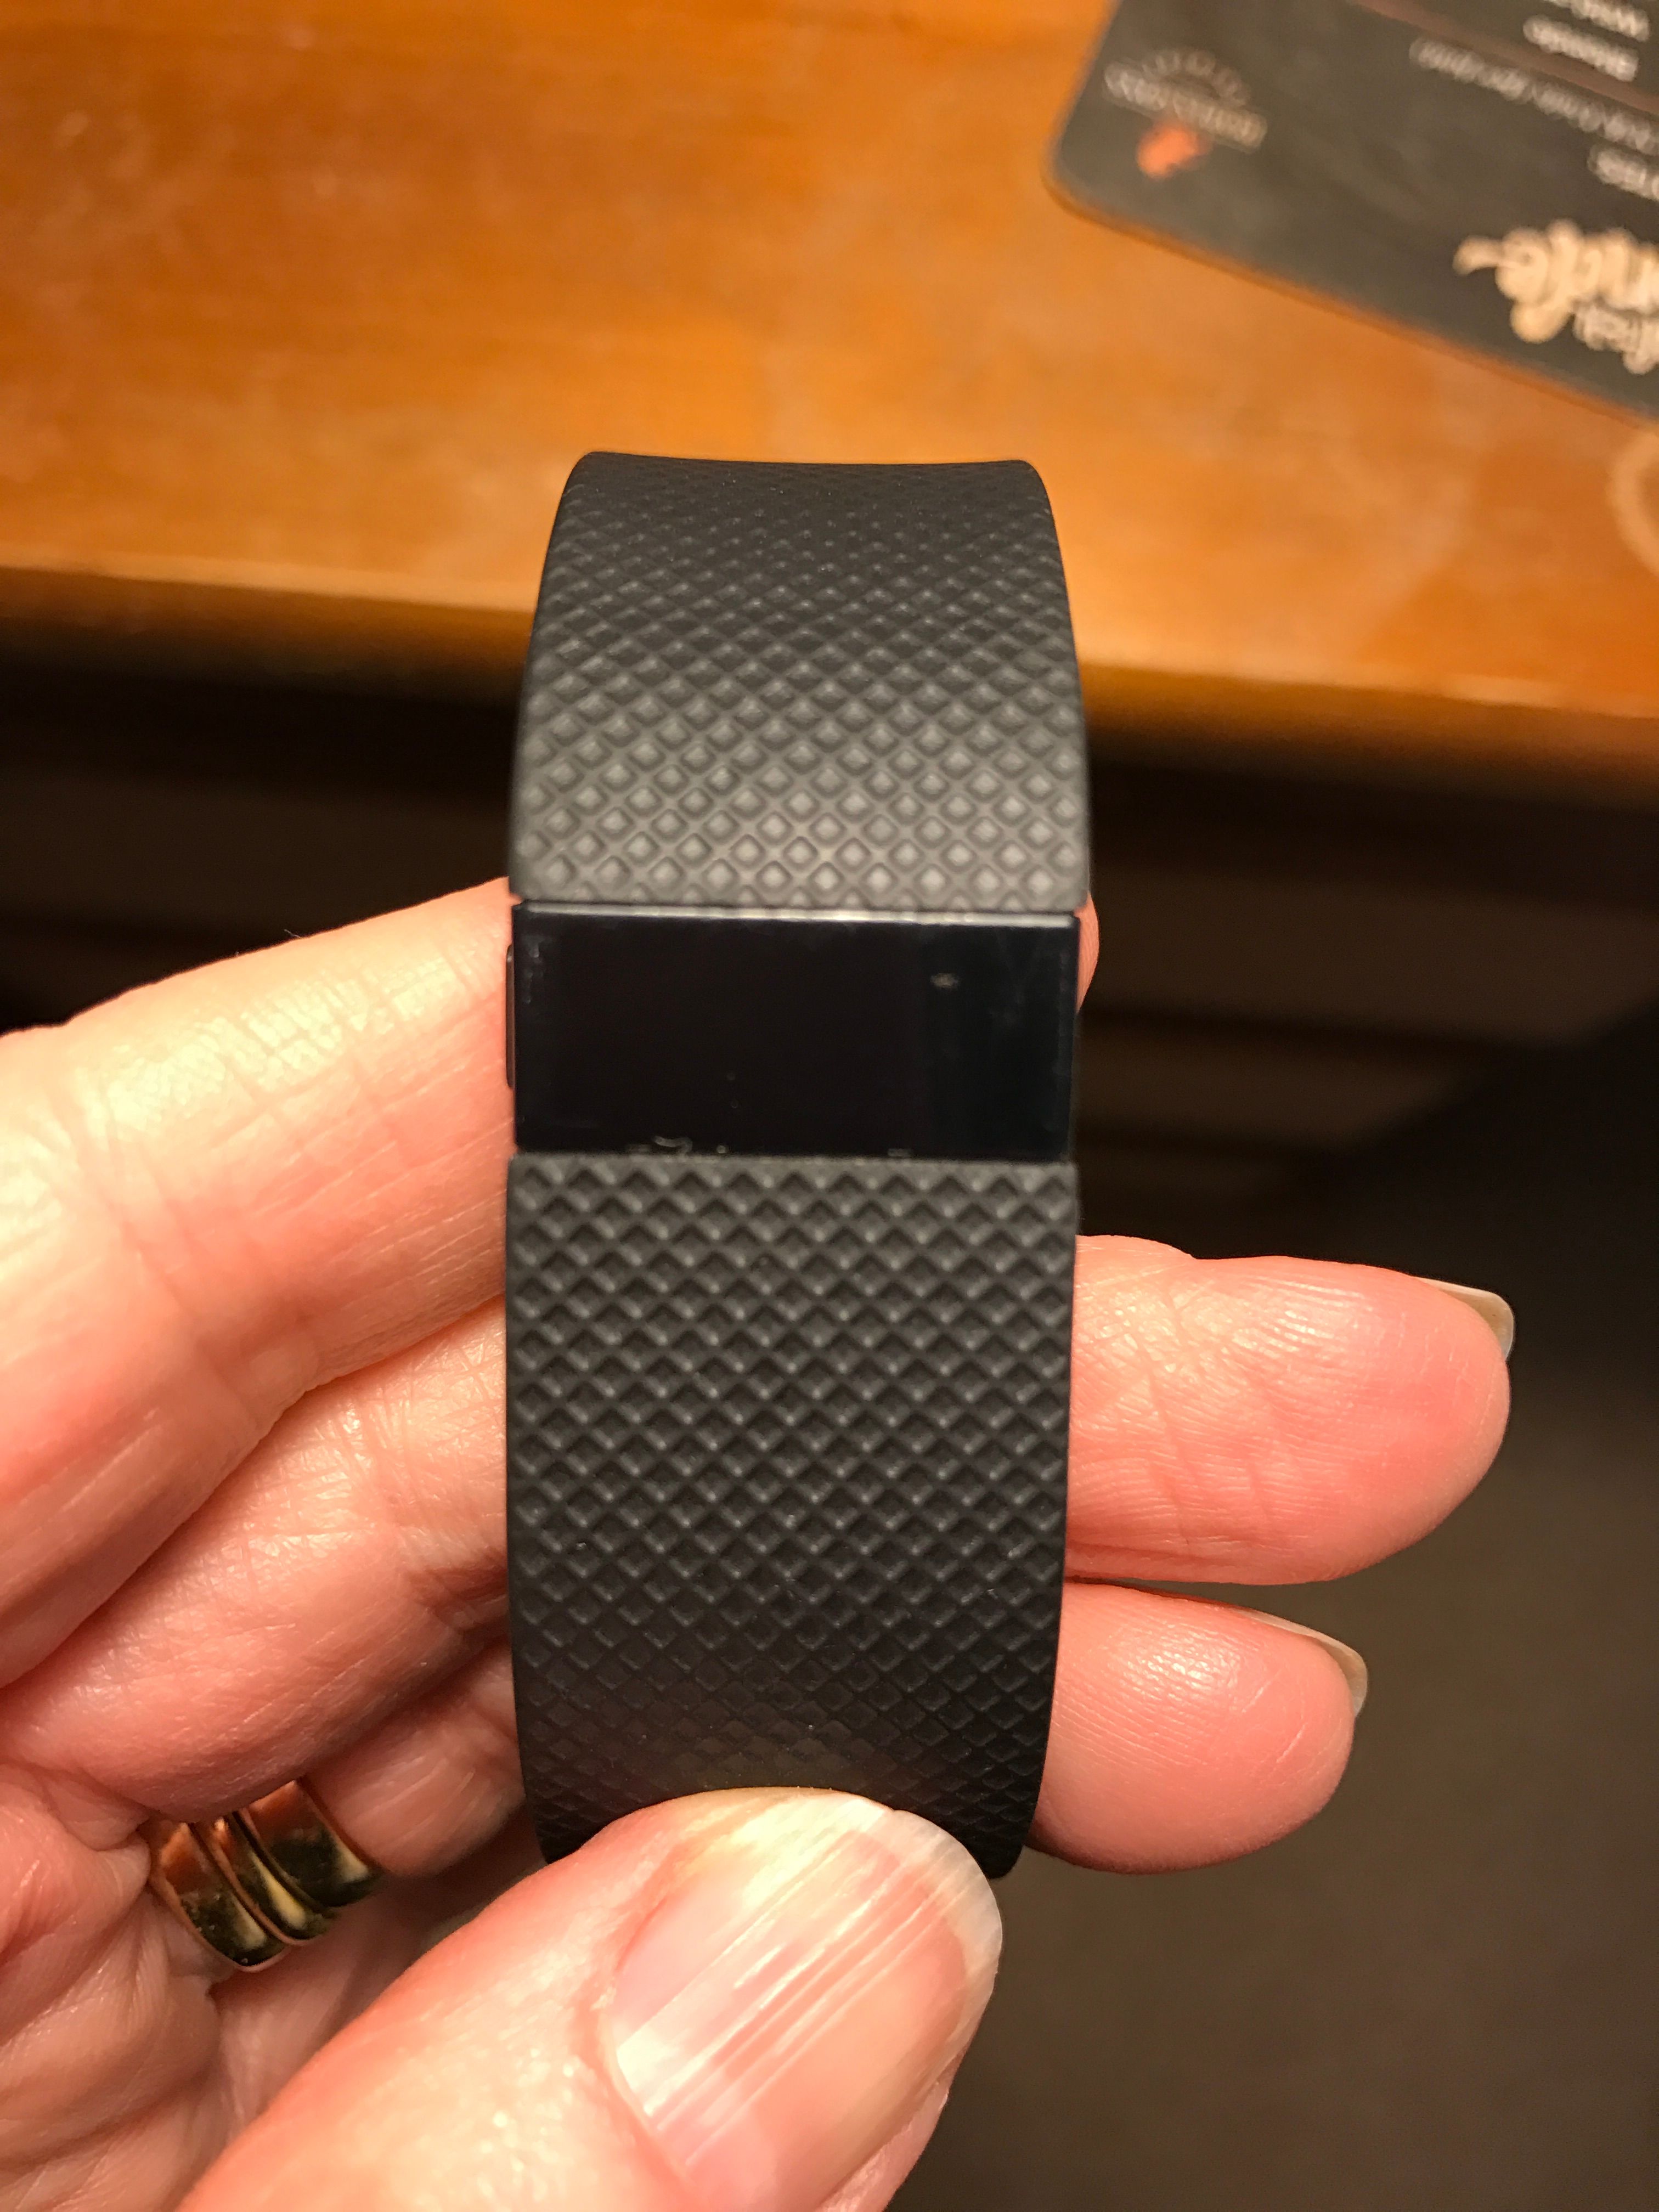 My Fitbit Charge HR screen is not showing -